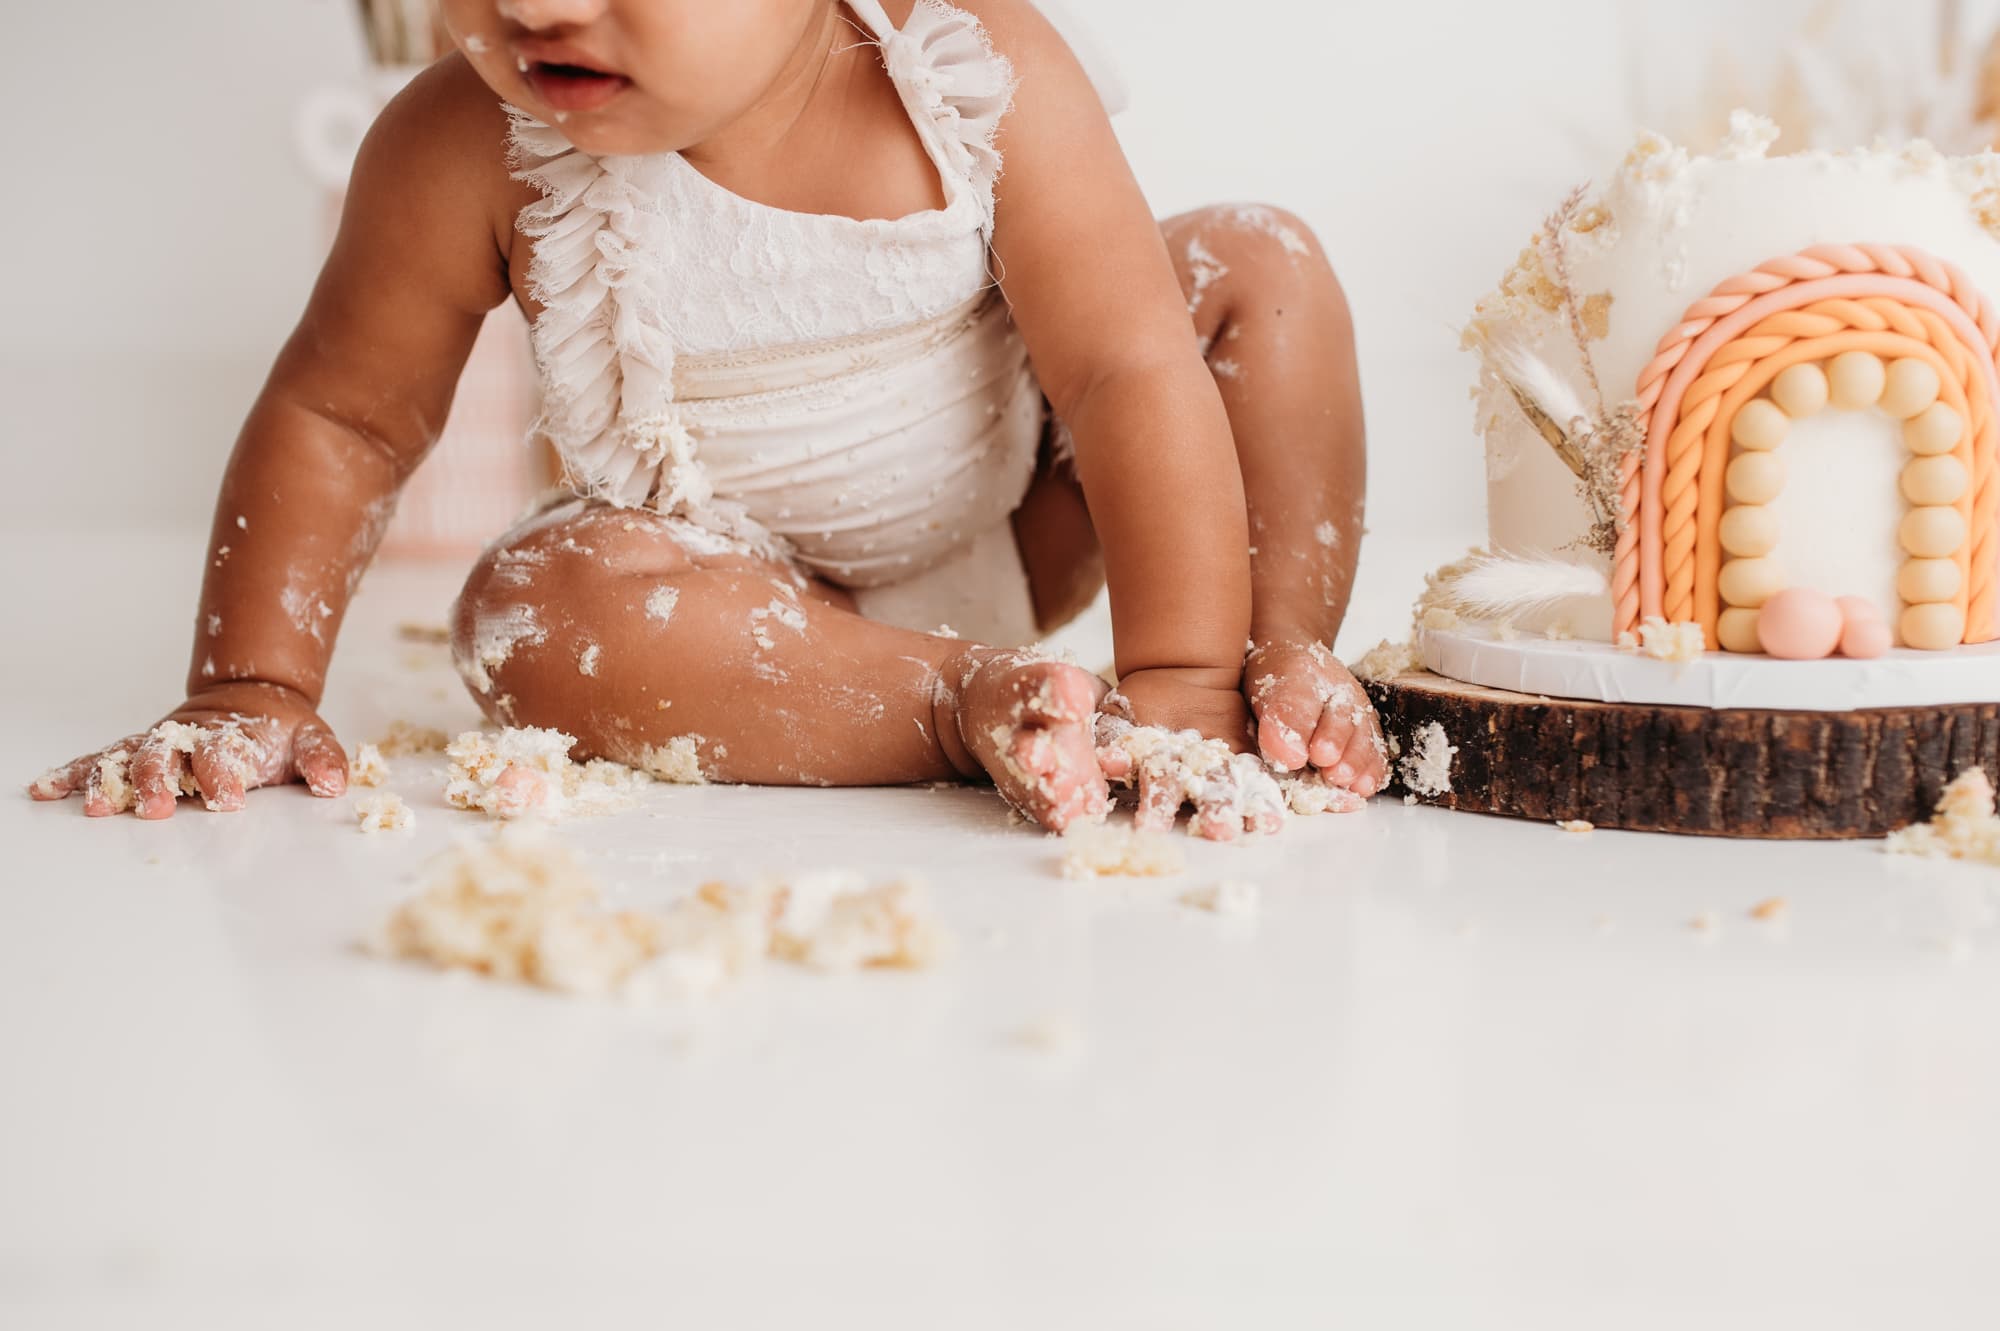 Messy details of little baby feet during cake smash.